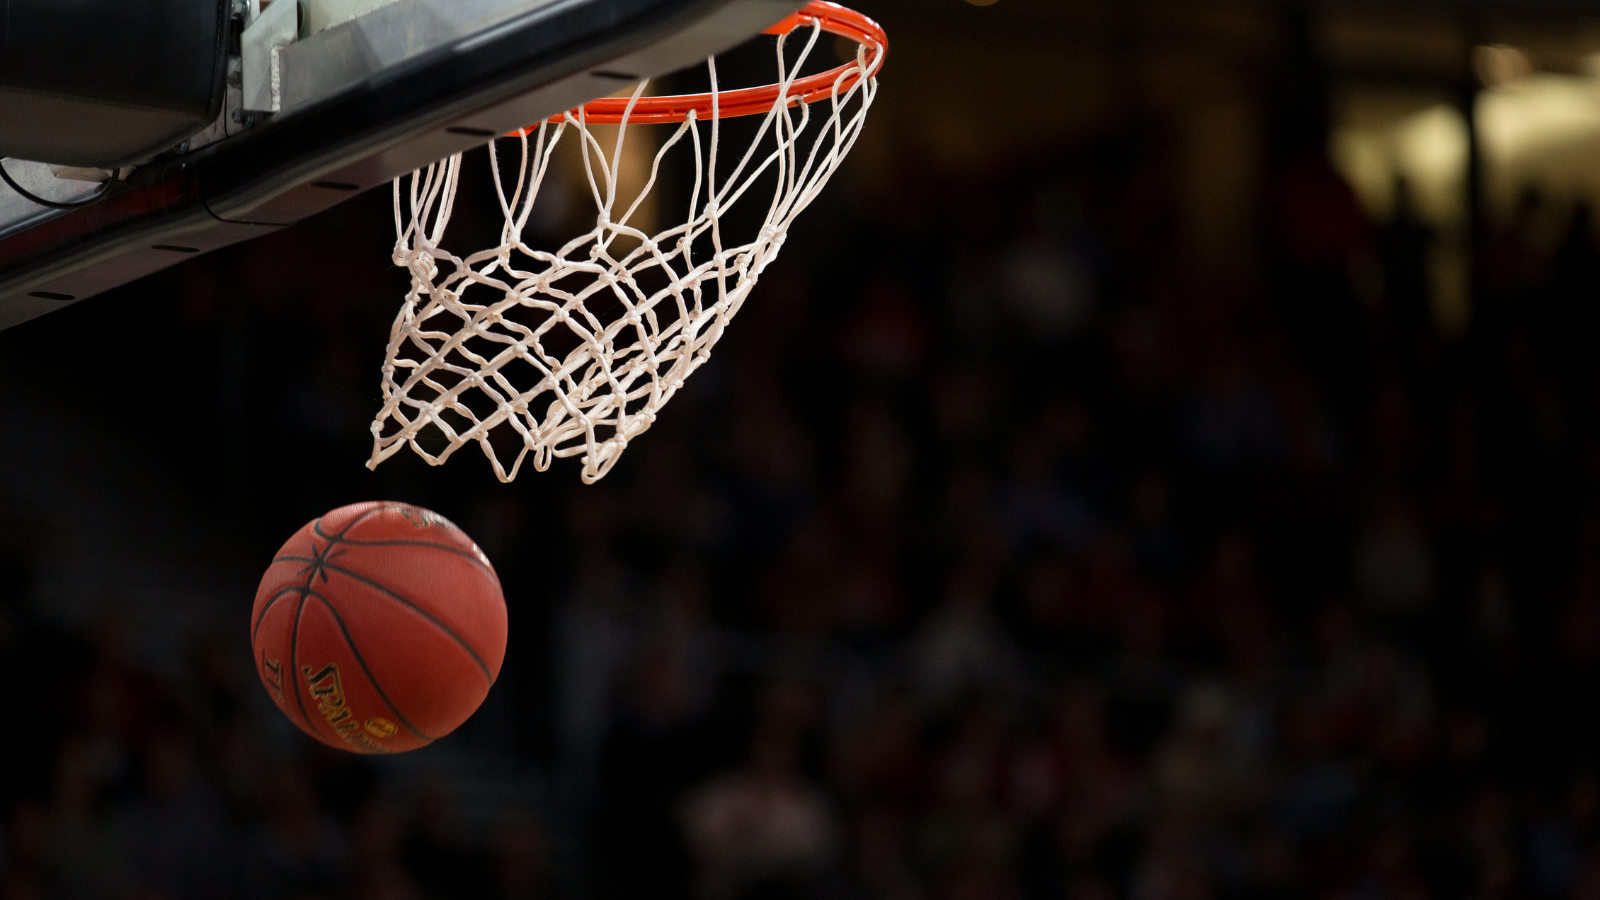 Digital Capabilities to Enable a Successful and Responsible March Madness